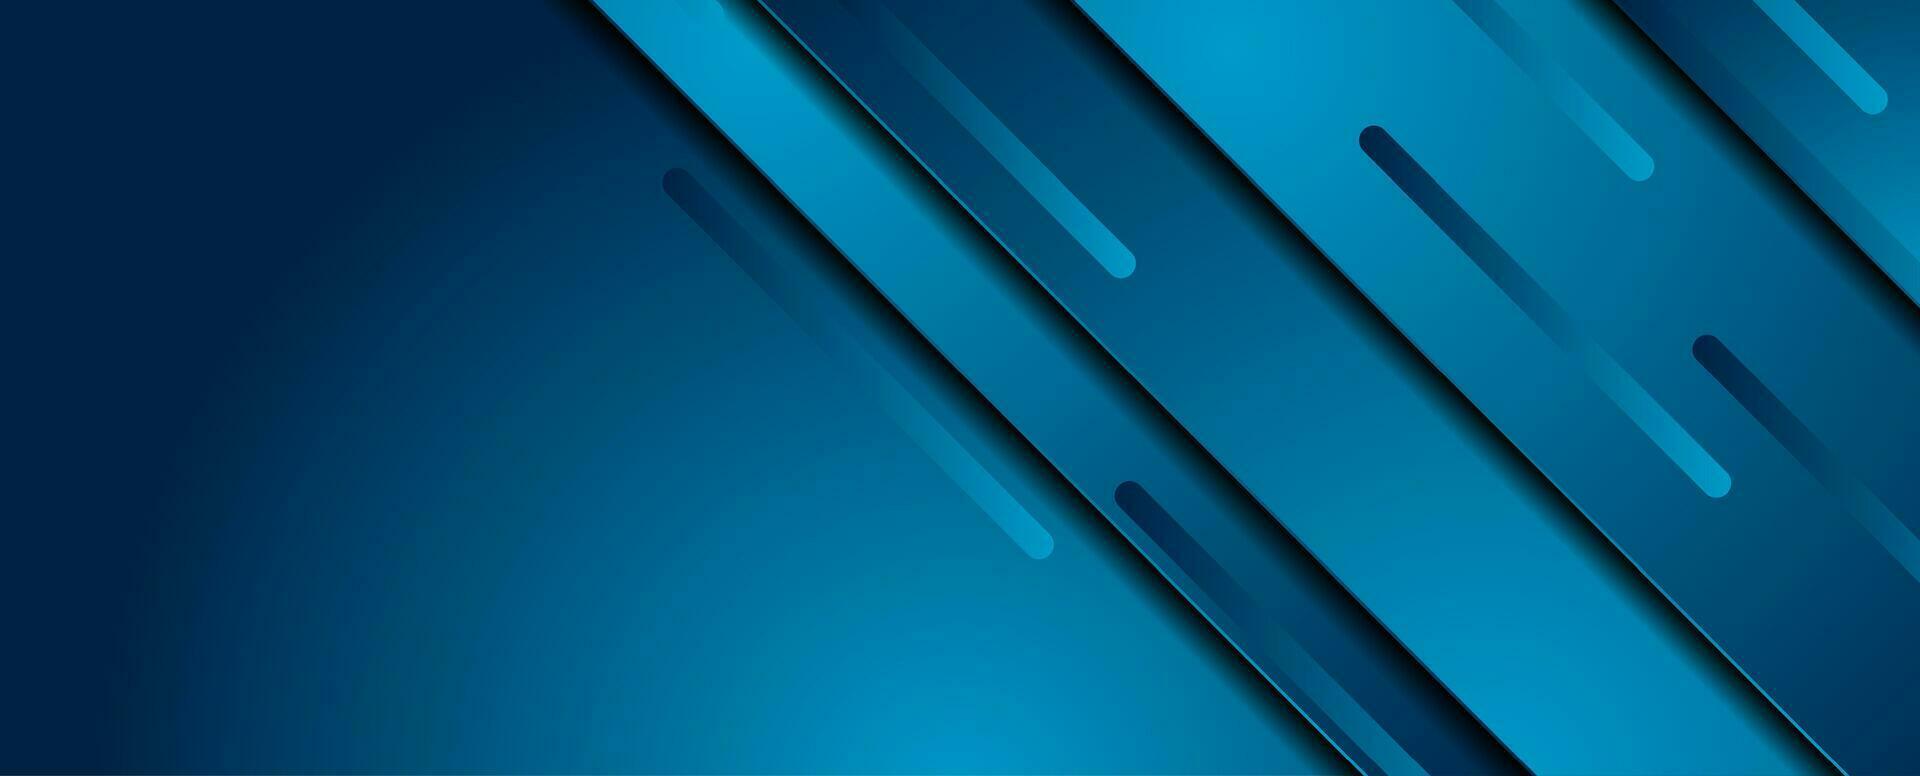 Blue stripes abstract tech geometric background vector